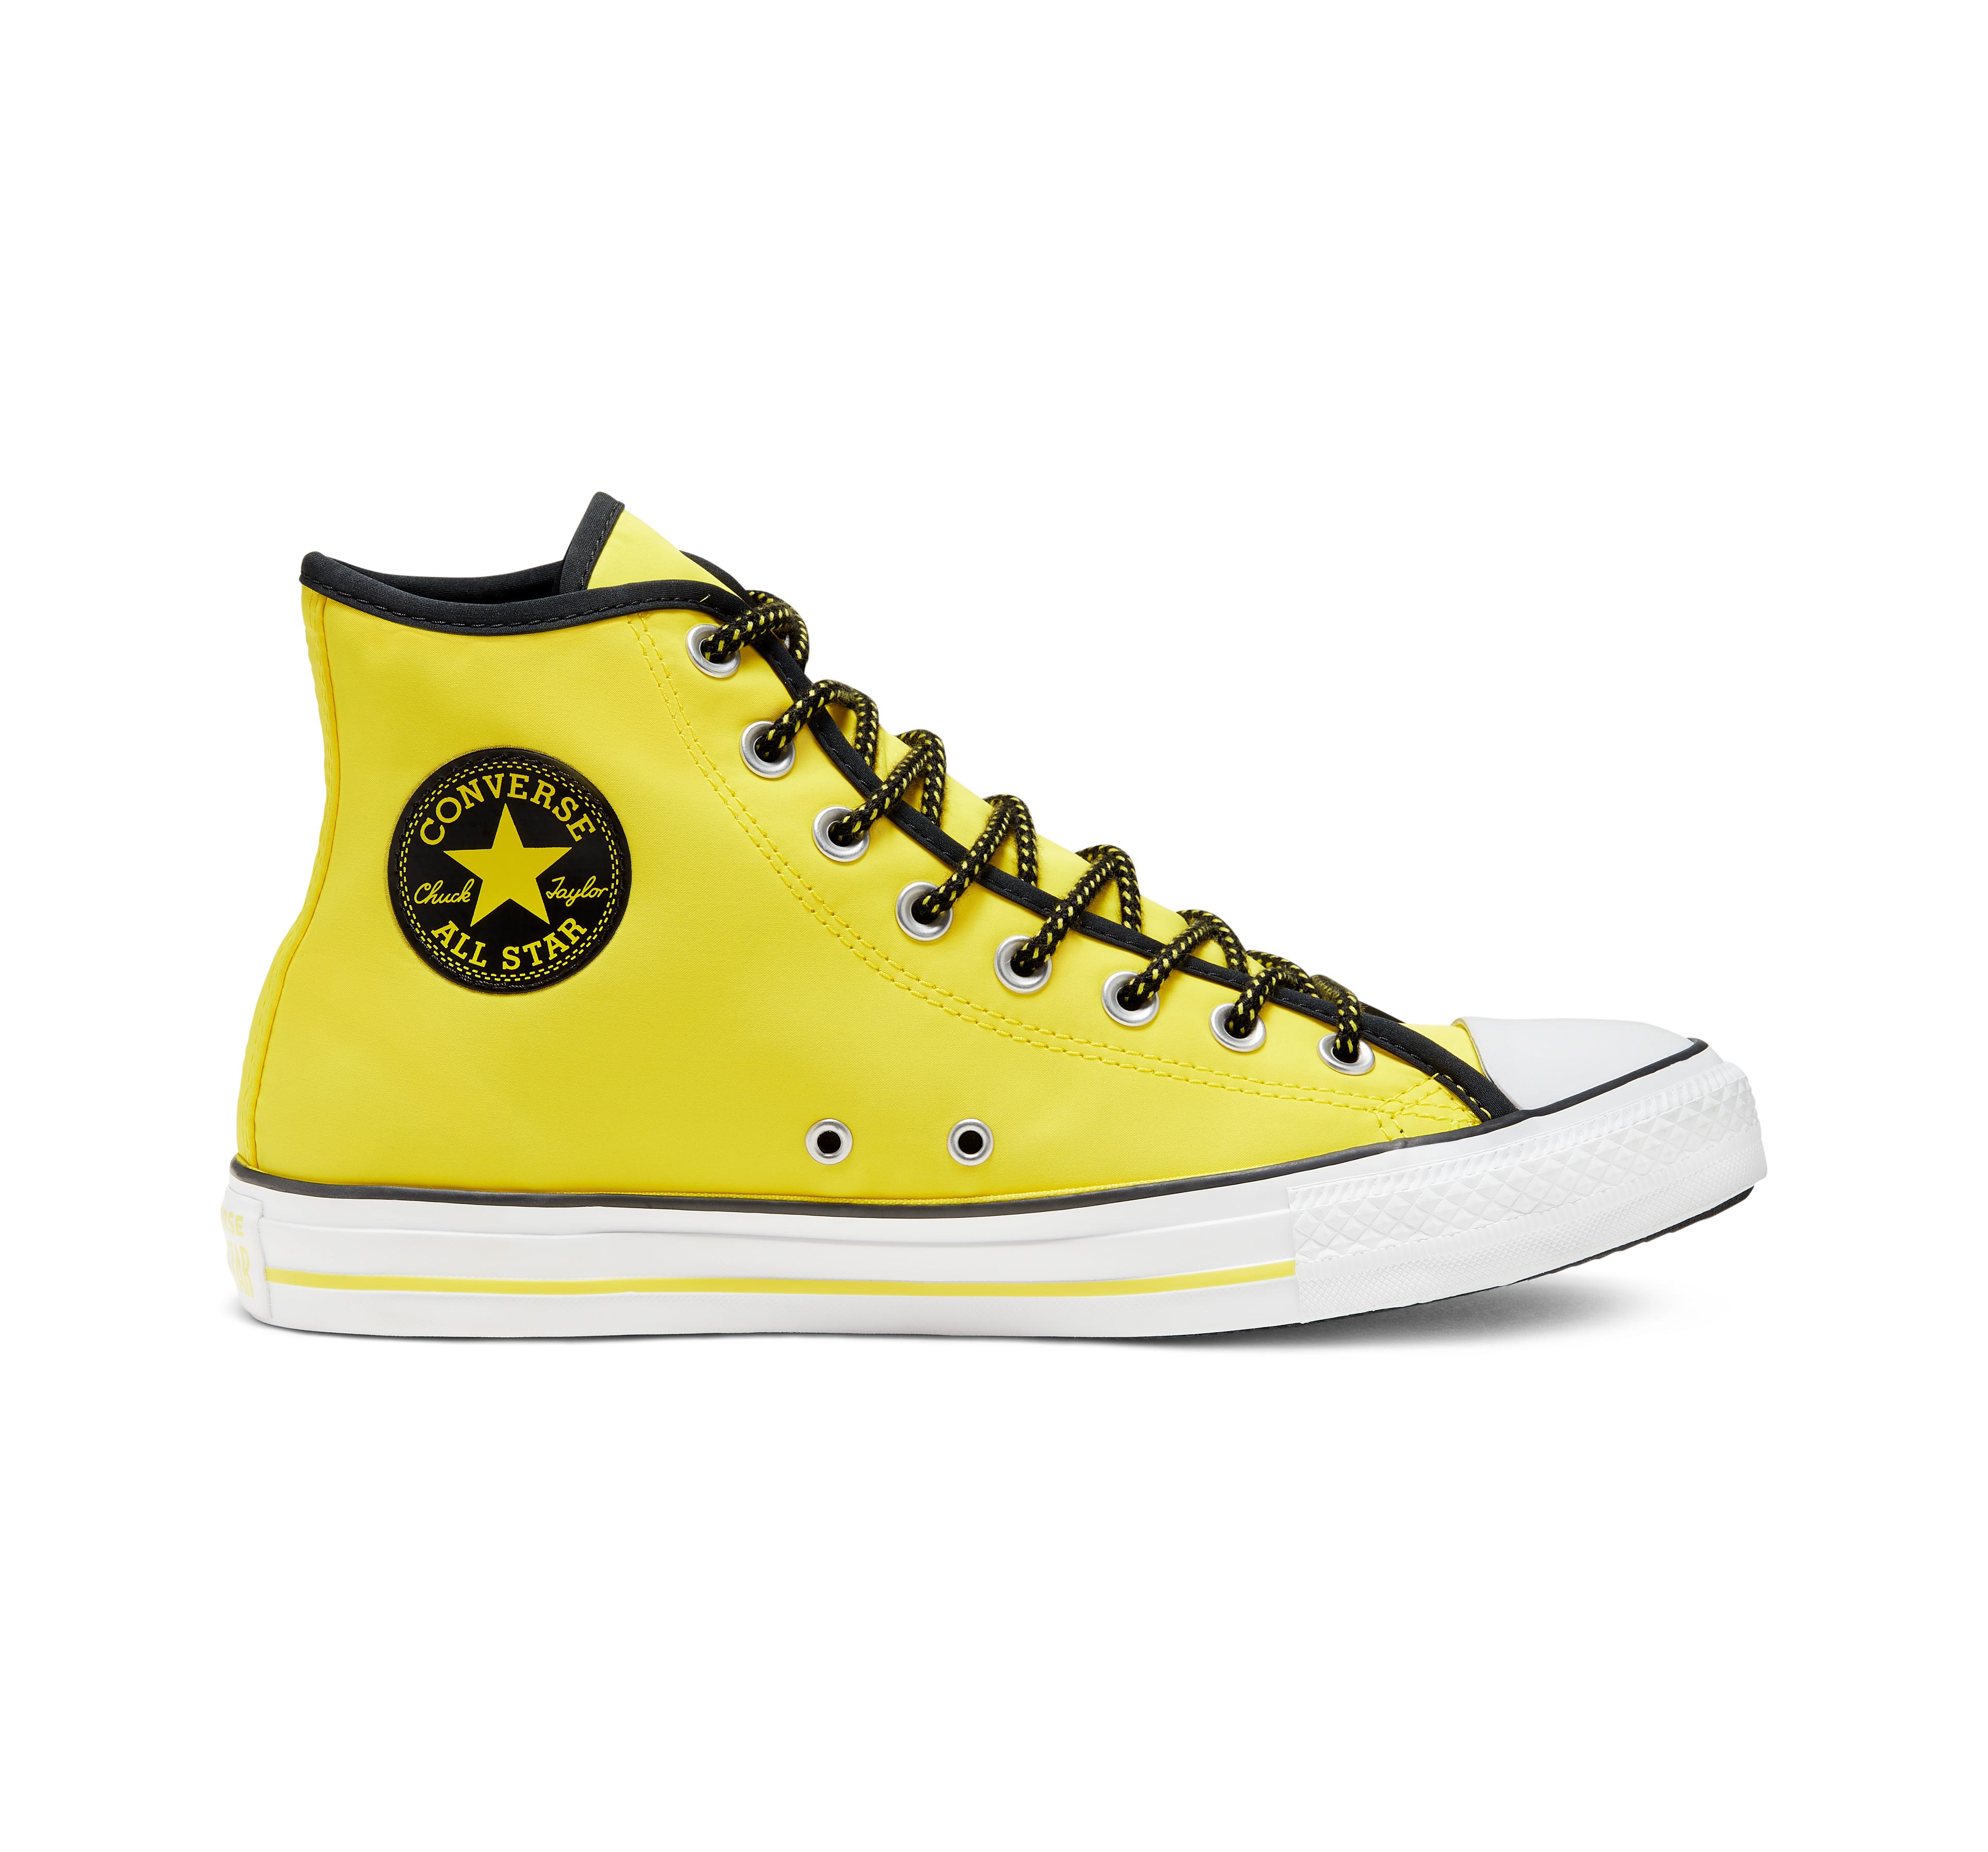 chuck taylor all star get tubed high top